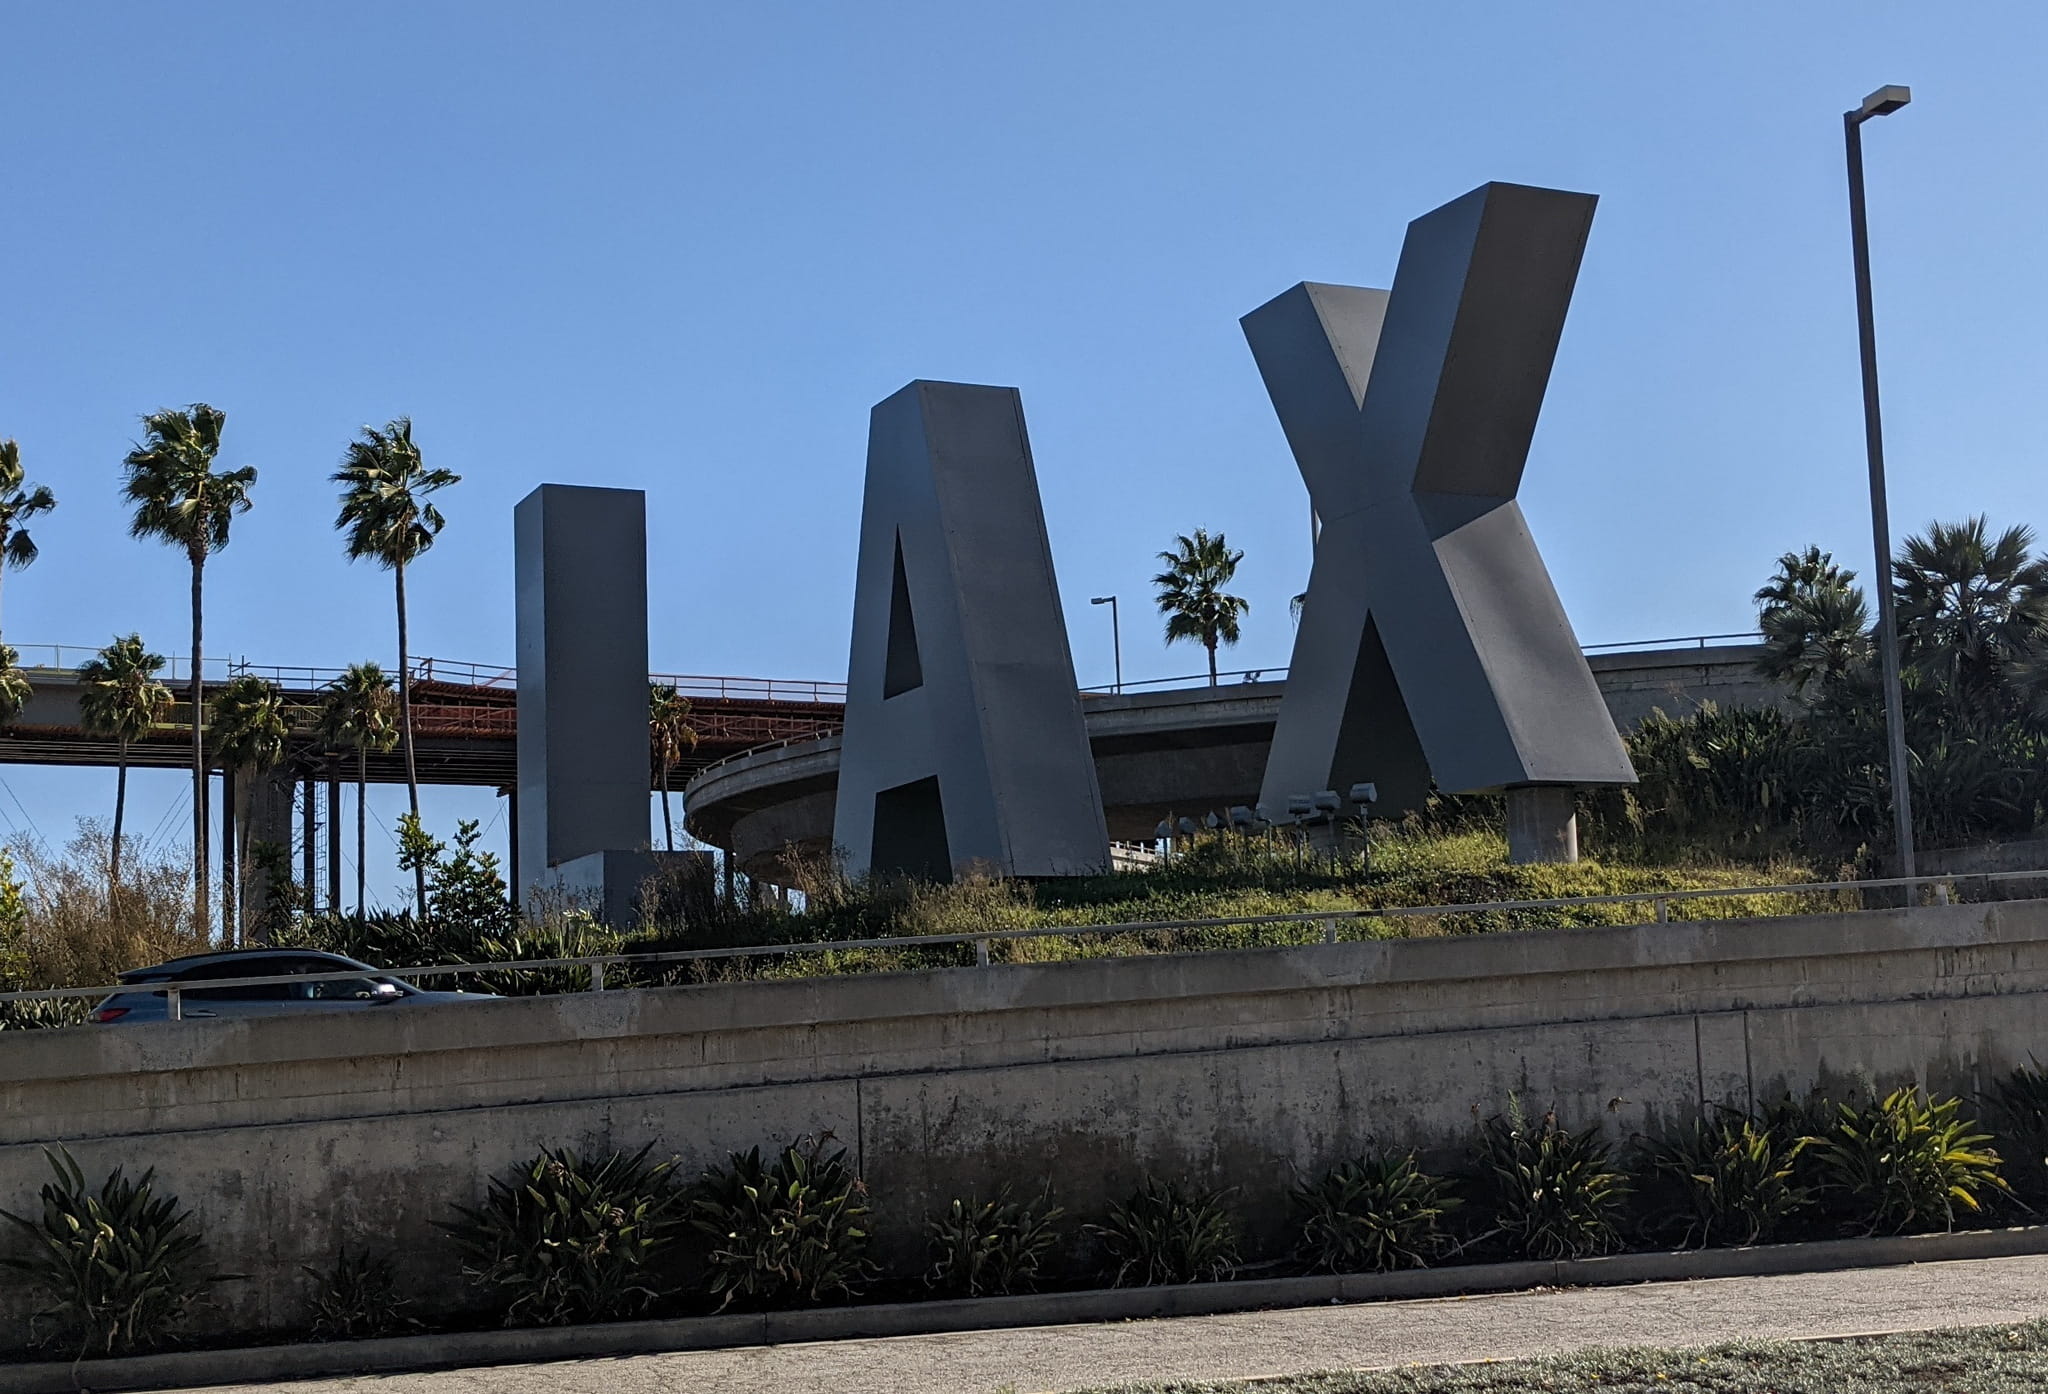 LAX entrance sign shows large silver letters L, A, X